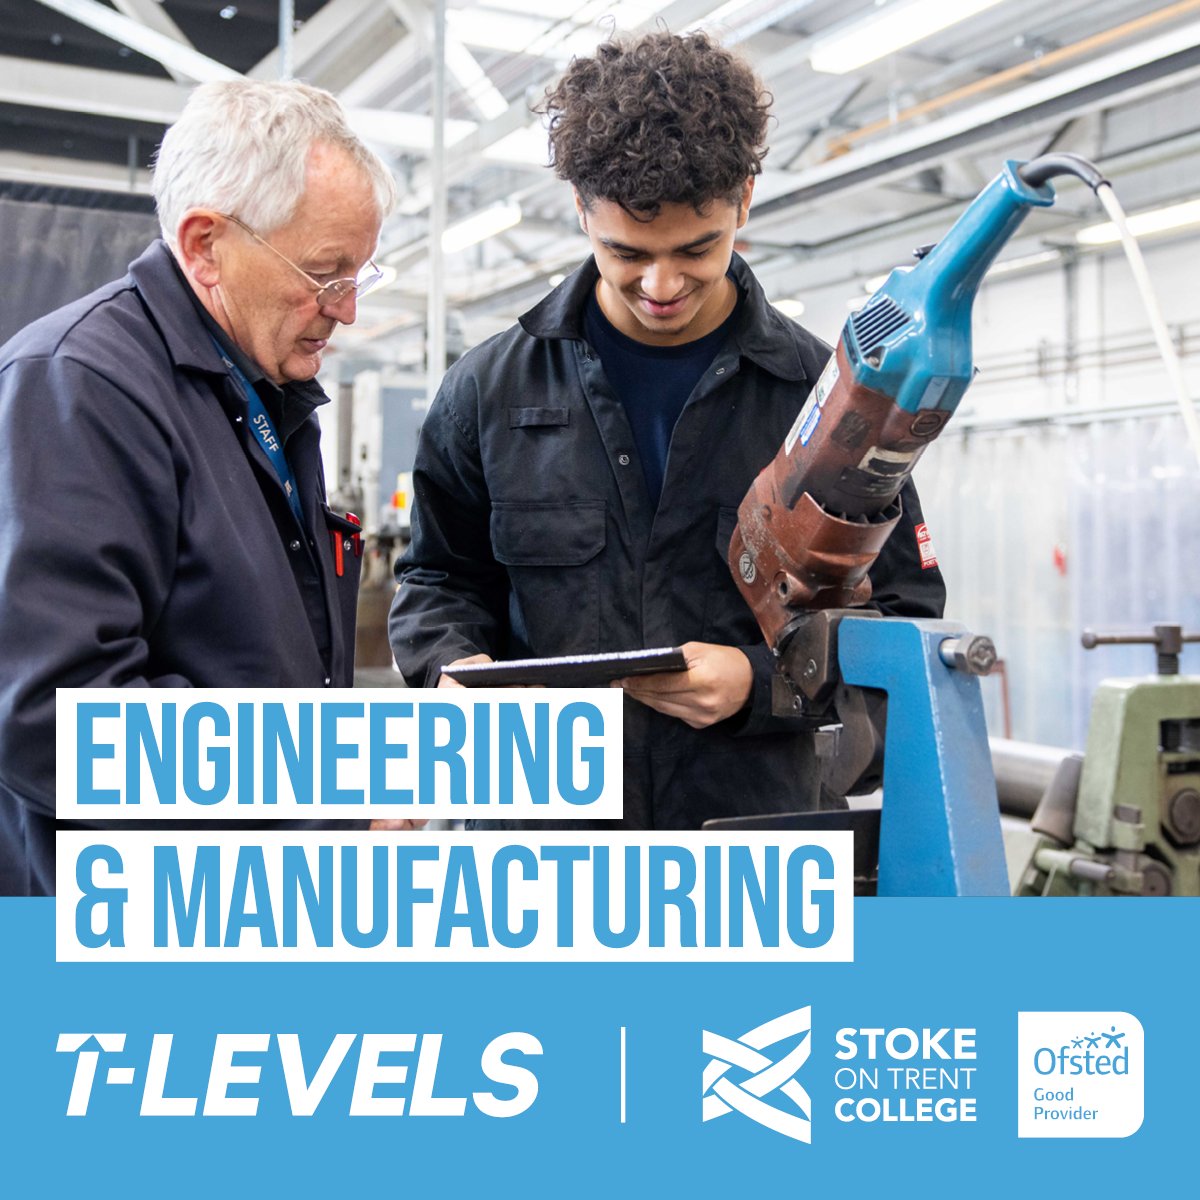 Take your future to the 𝑵𝑬𝑿𝑻 Level with a 𝑻 𝑳𝑬𝑽𝑬𝑳... ✅ Equivalent to 3 A Levels ✅ 45-day industry work placement ✅ Available in 13 industry areas Gain the skills, qualifications and experience you need to work in a specific industry. 📲 stokecoll.ac.uk/t-levels